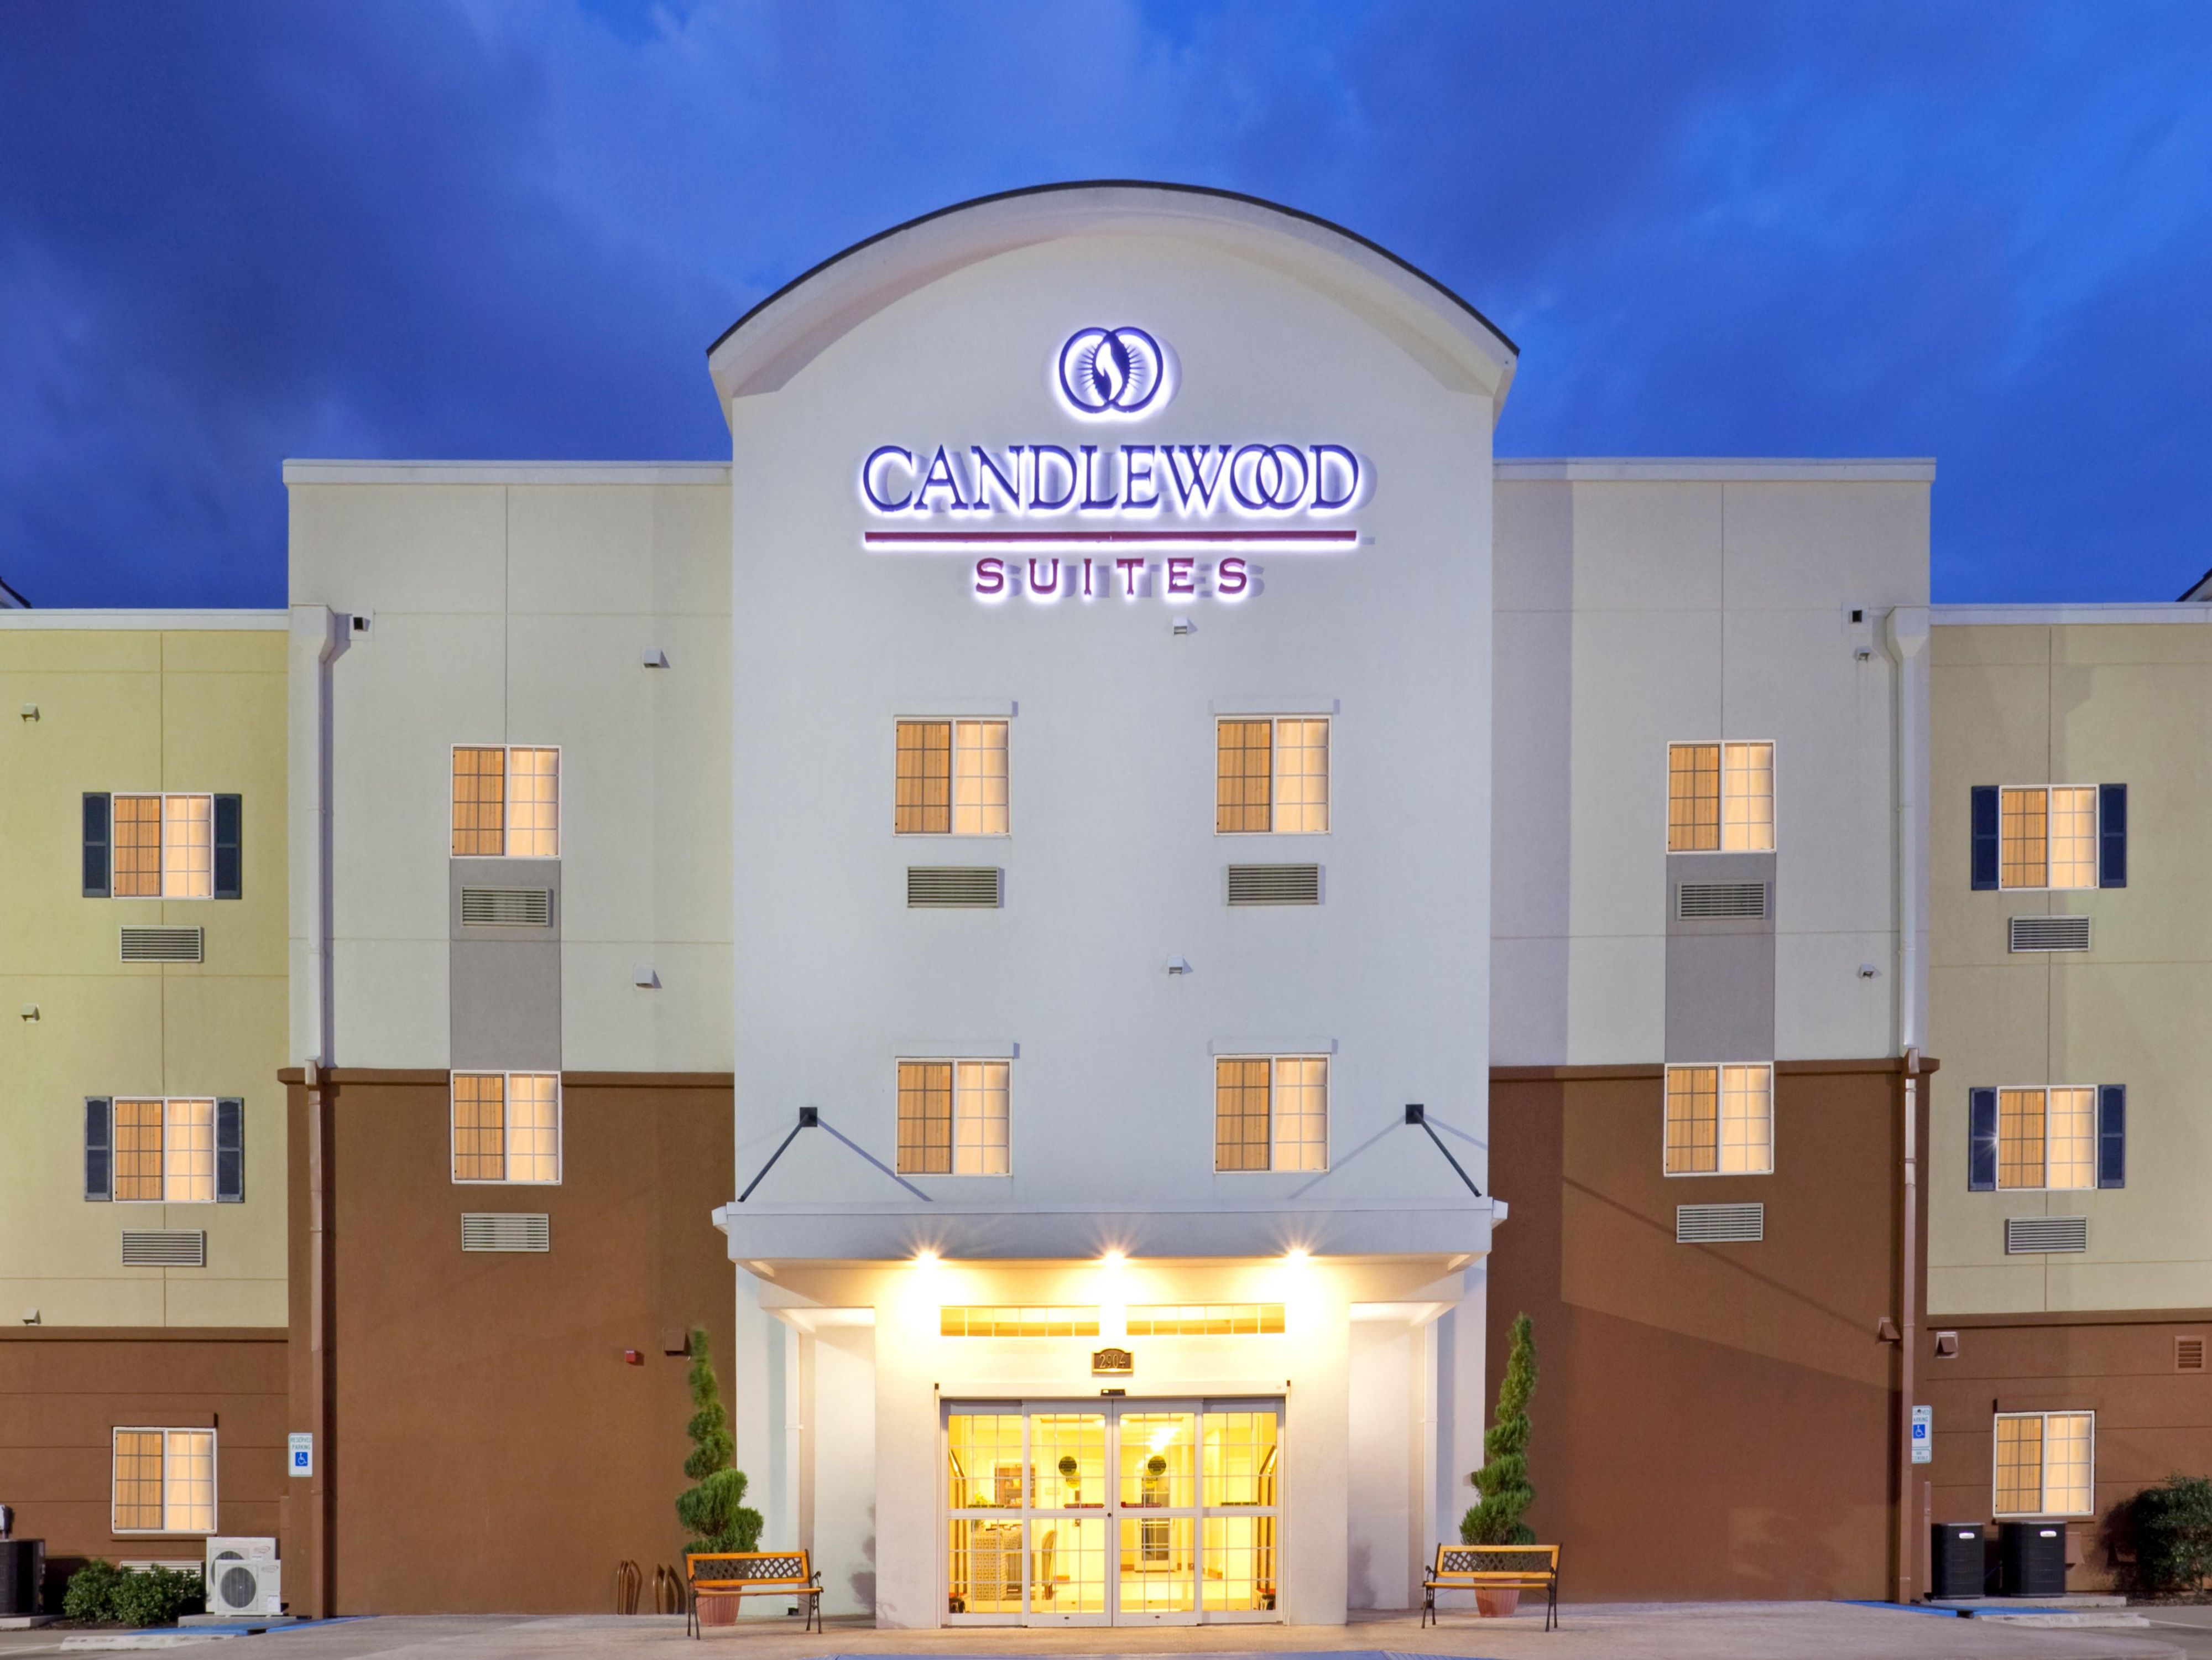 fairbanks Hotels: Candlewood Suites Fairbanks - Extended Stay Hotel in